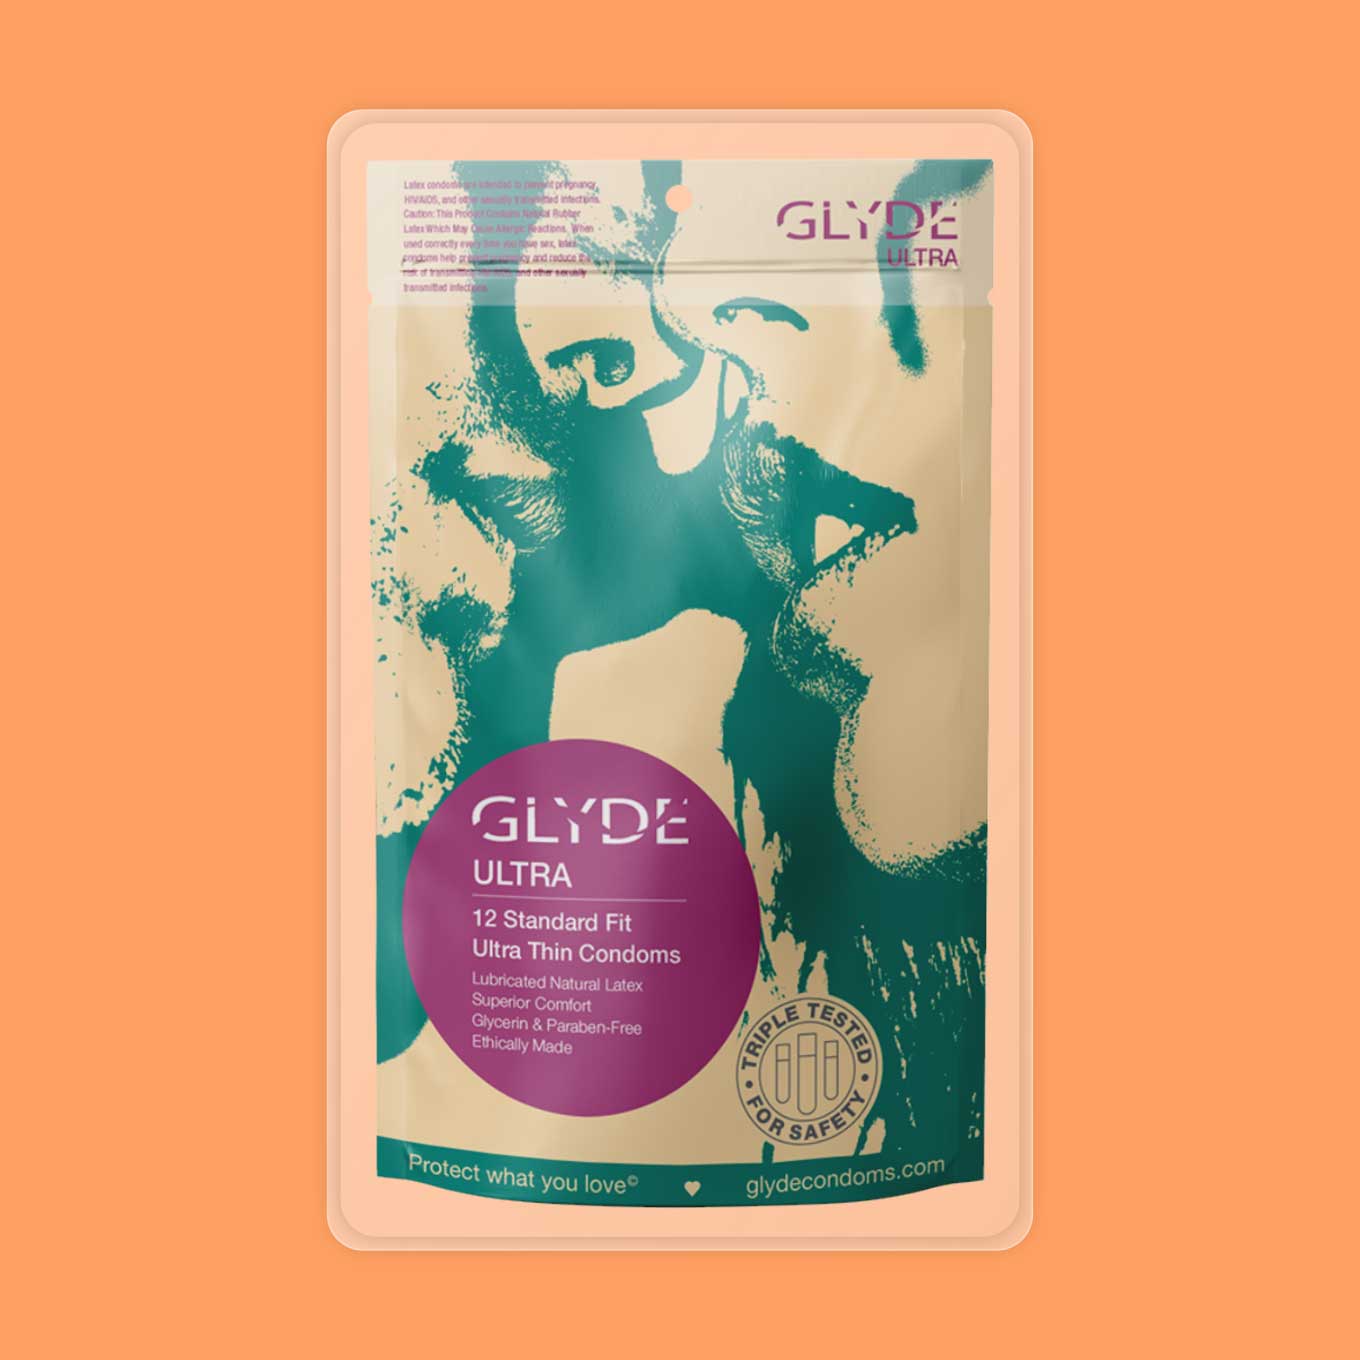 A package of Glyde ultra thin condoms